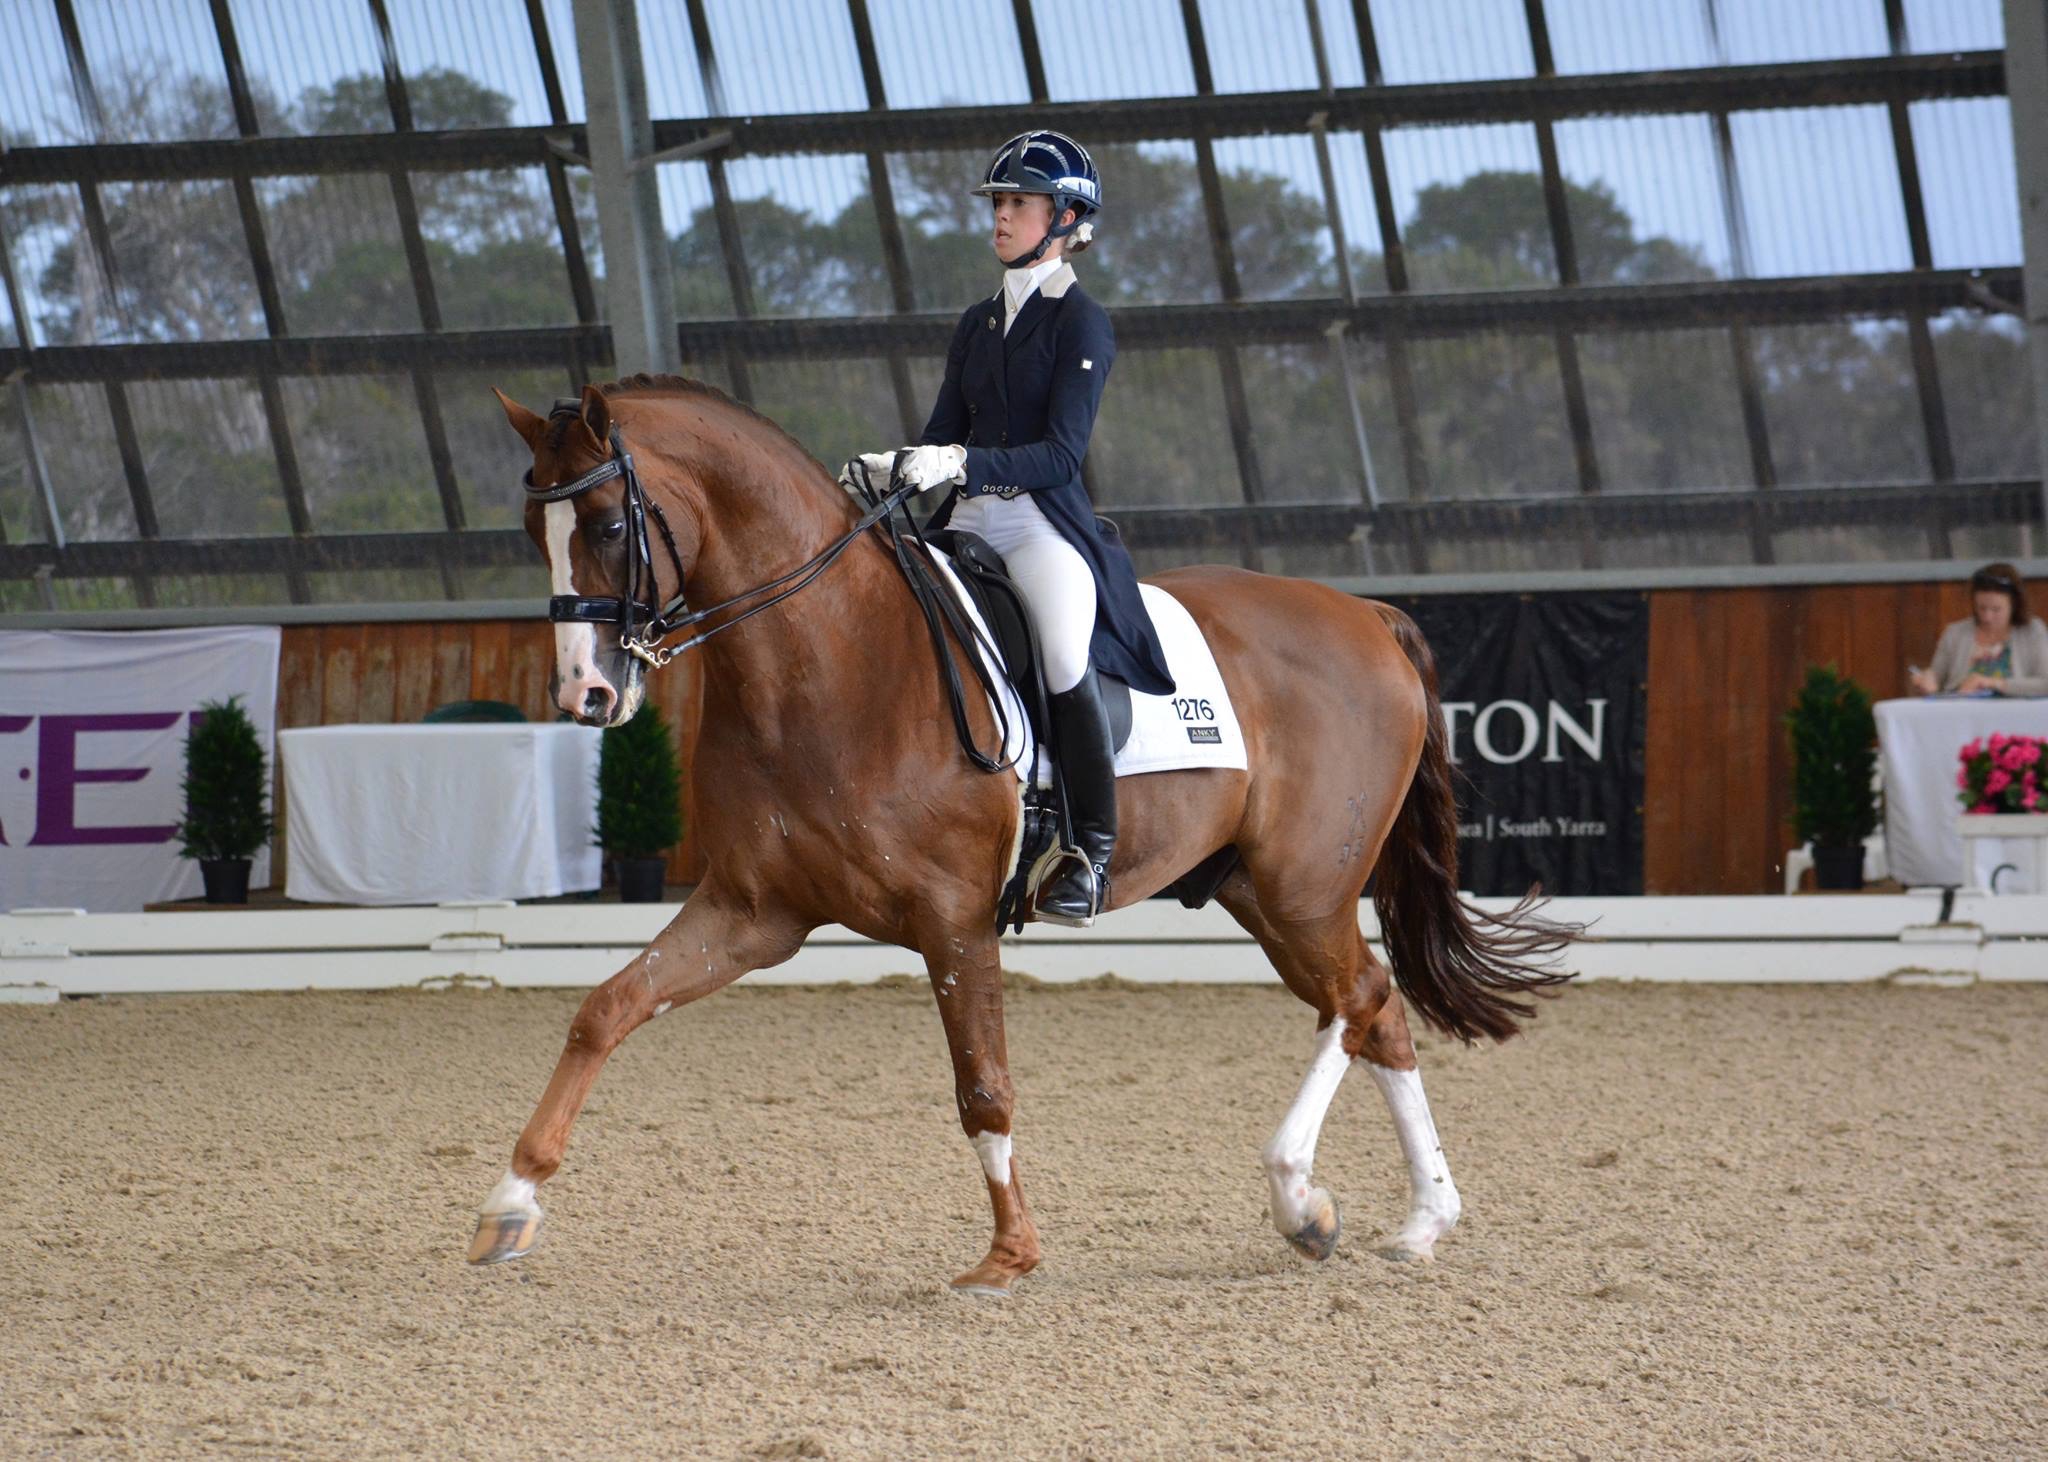 EXCITING OPPORTUNITIES FOR YOUNG DRESSAGE RIDERS Equestrian Queensland